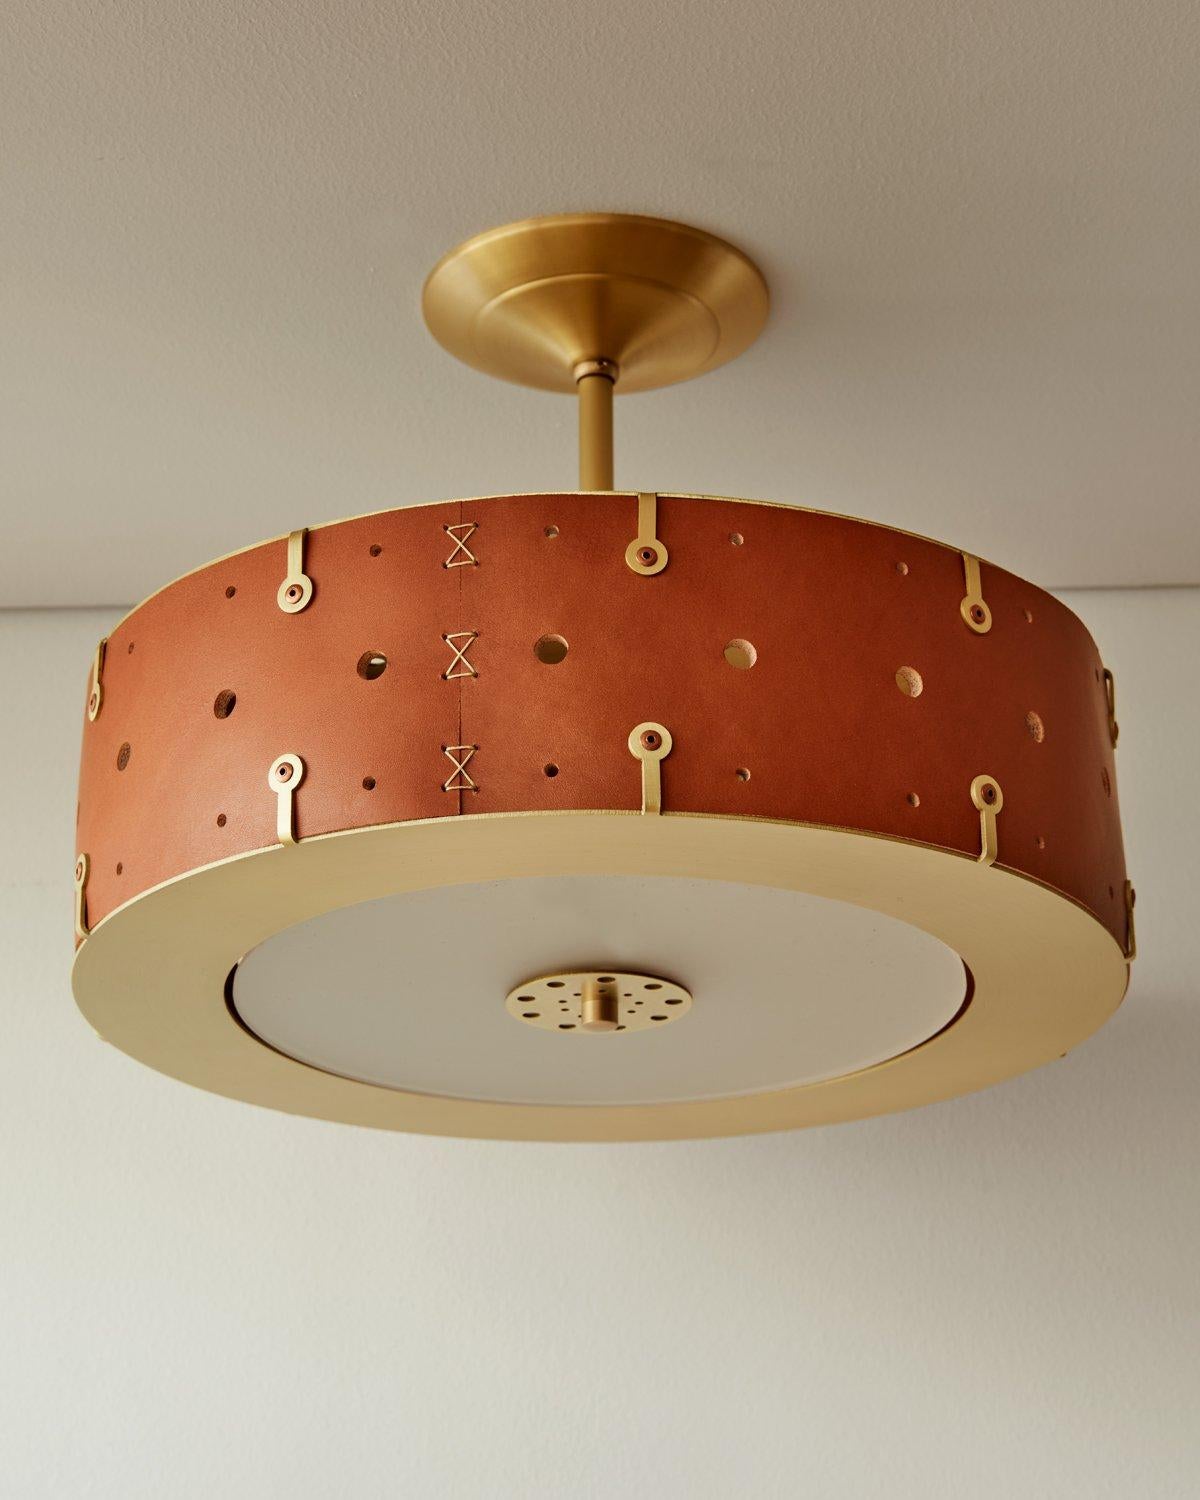 Contemporary Modern Satin Brass Sarah Ceiling Pendant in Tan Leather 14